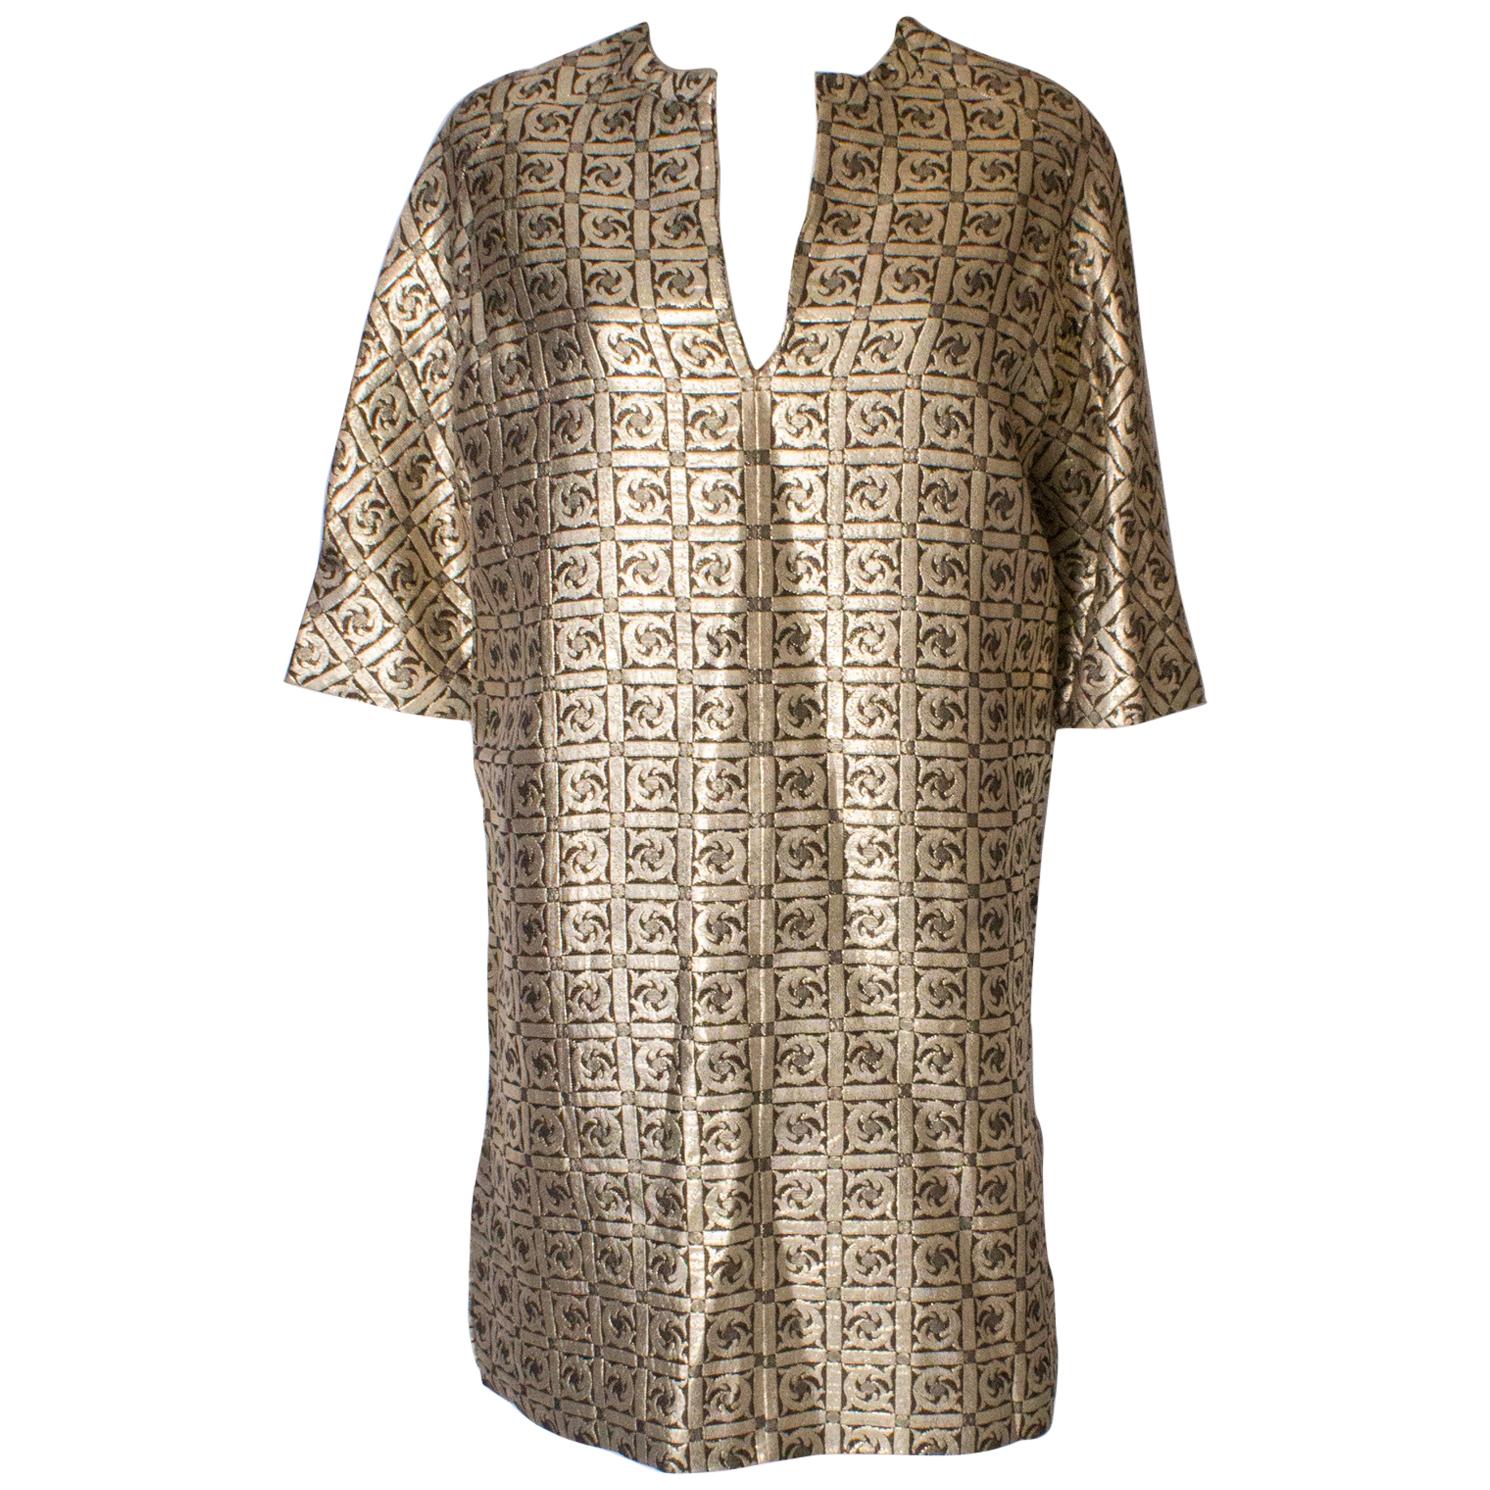 A Vintage 1970s Gold Brocade Tunic Dress  /Top For Sale